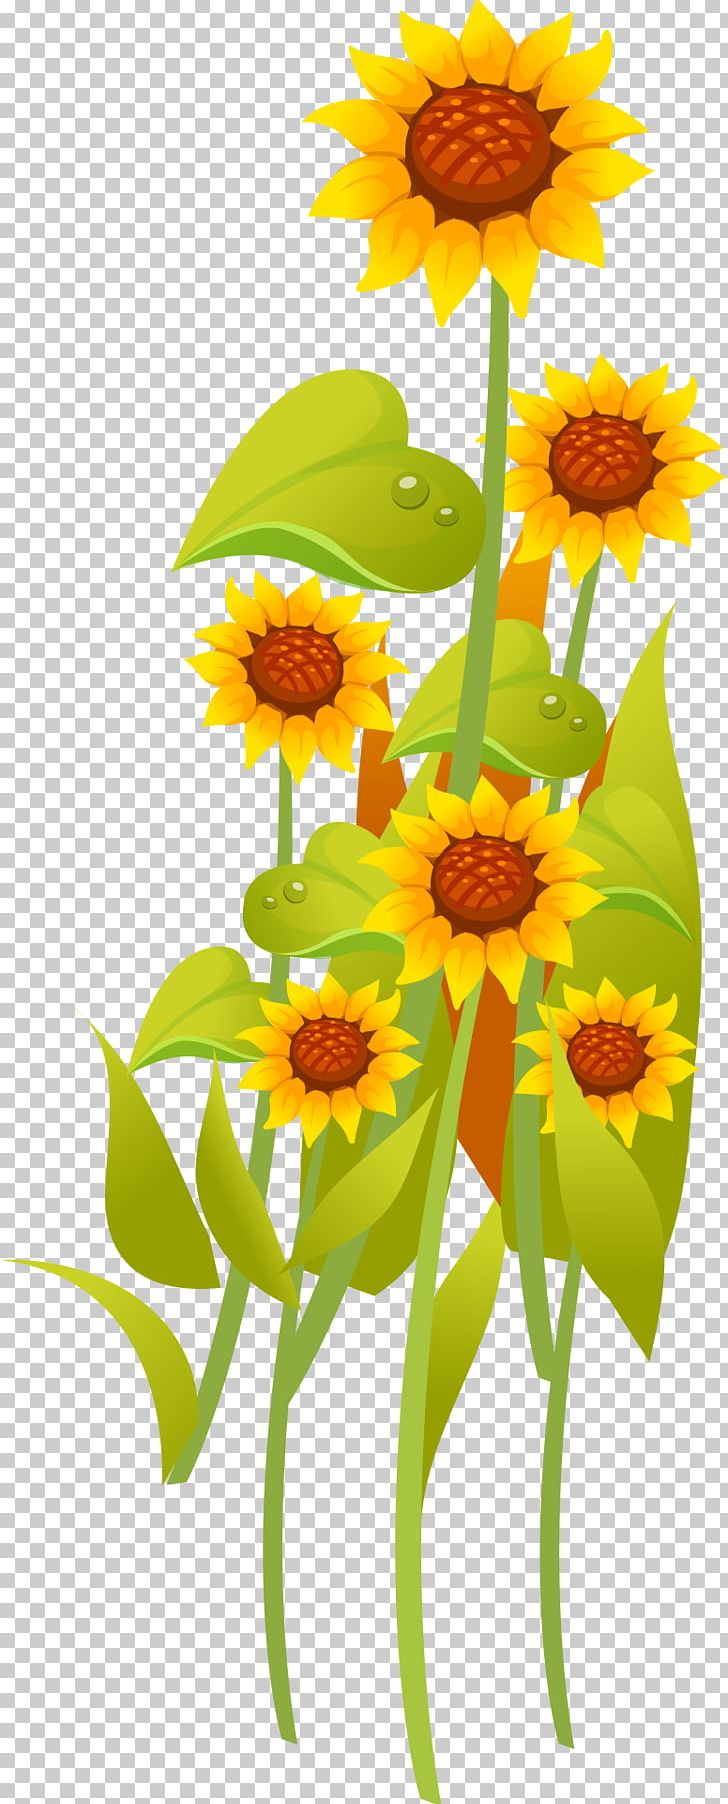 Common Sunflower Yellow Illustration PNG, Clipart, Cartoon, Cartoon Sunflower, Daisy Family, Designer, Download Free PNG Download